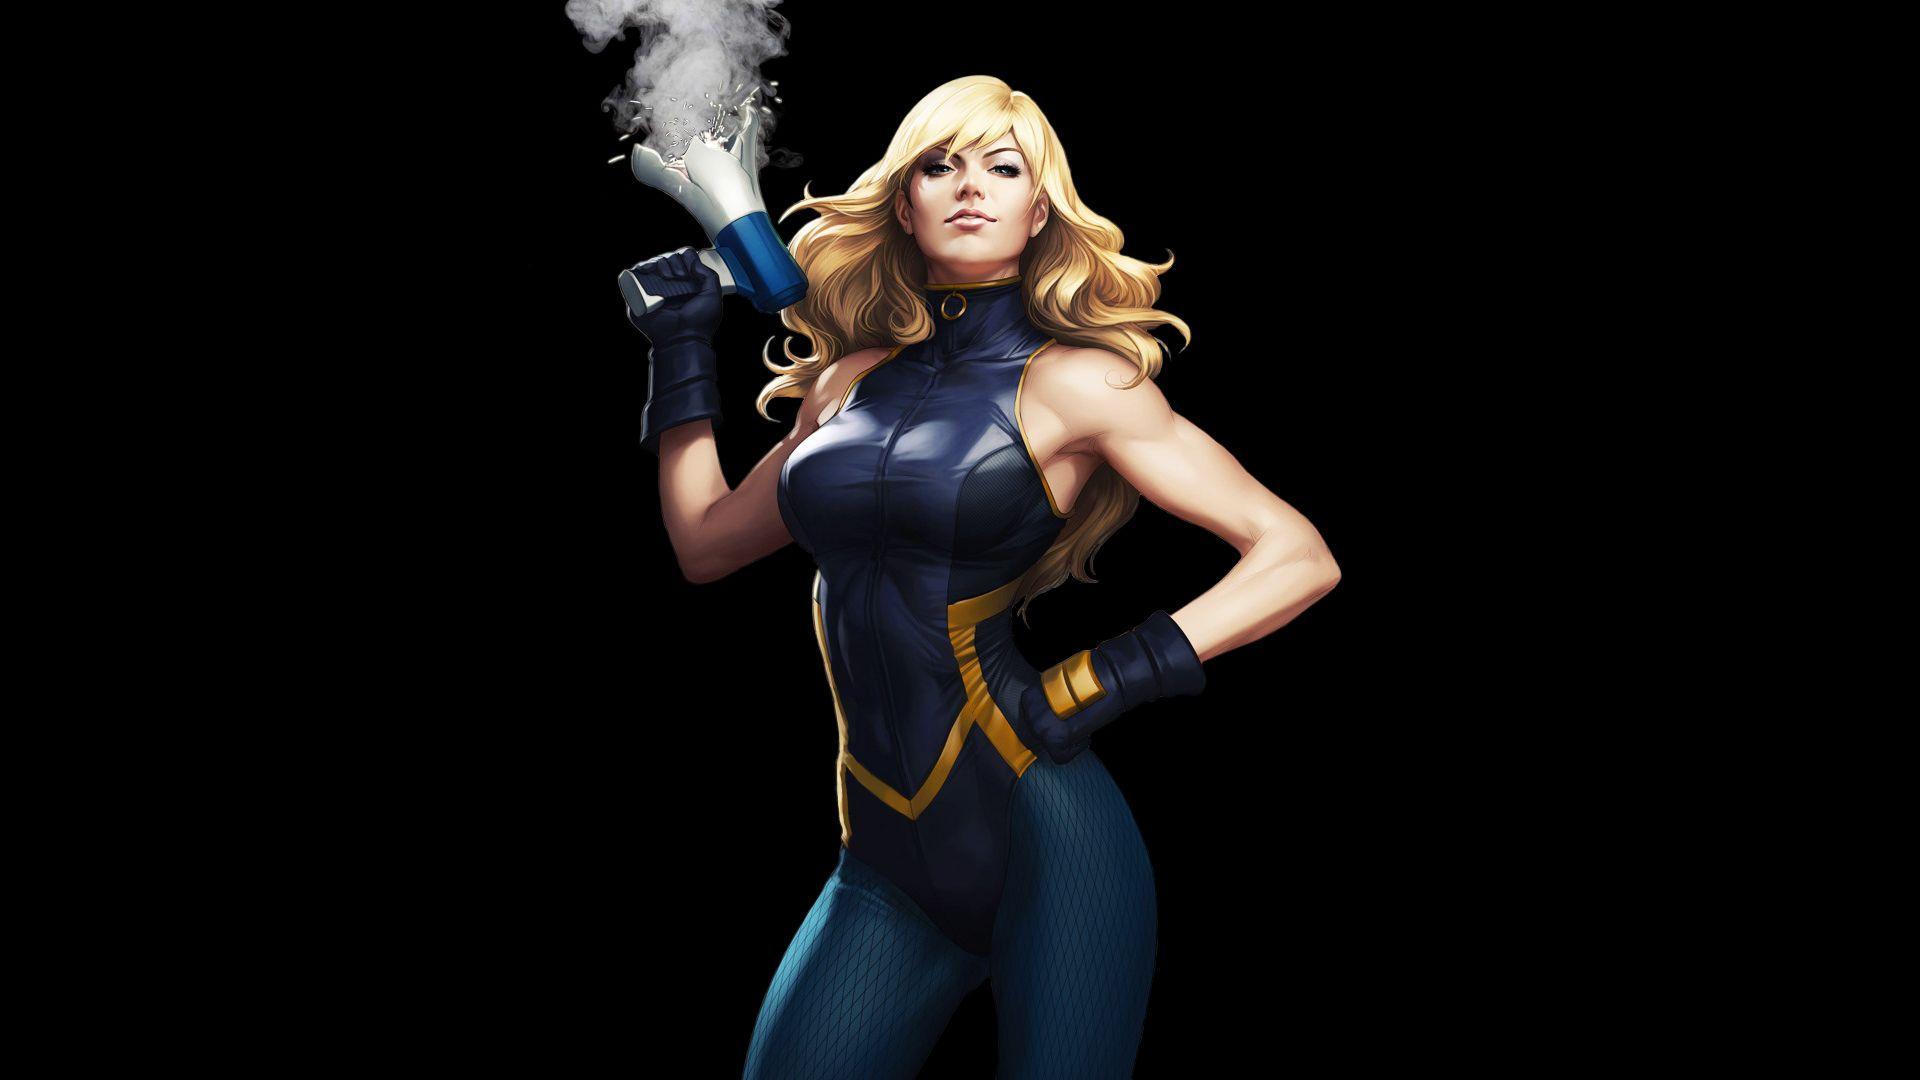 Black Canary Wallpapers Top Free Black Canary Backgrounds Wallpaperaccess Here you can find the best green arrow wallpapers uploaded by our community. black canary wallpapers top free